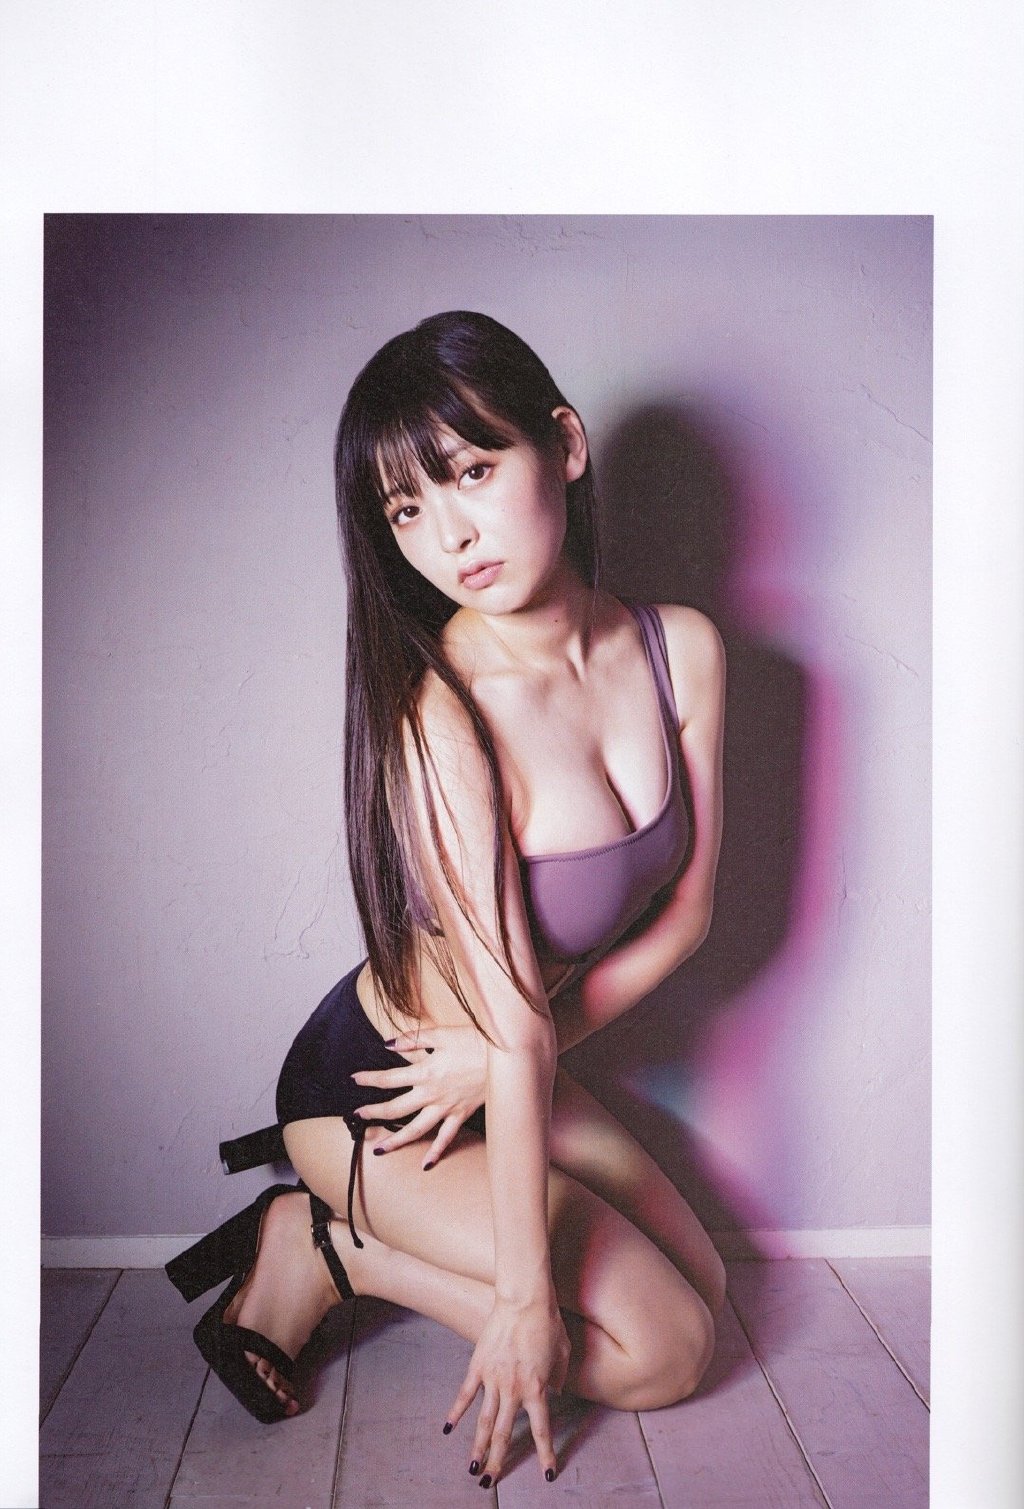 This is the sample picture from Sumire Uesaka｜上坂すみれ - Sumireiro post. Click here to see image full size.